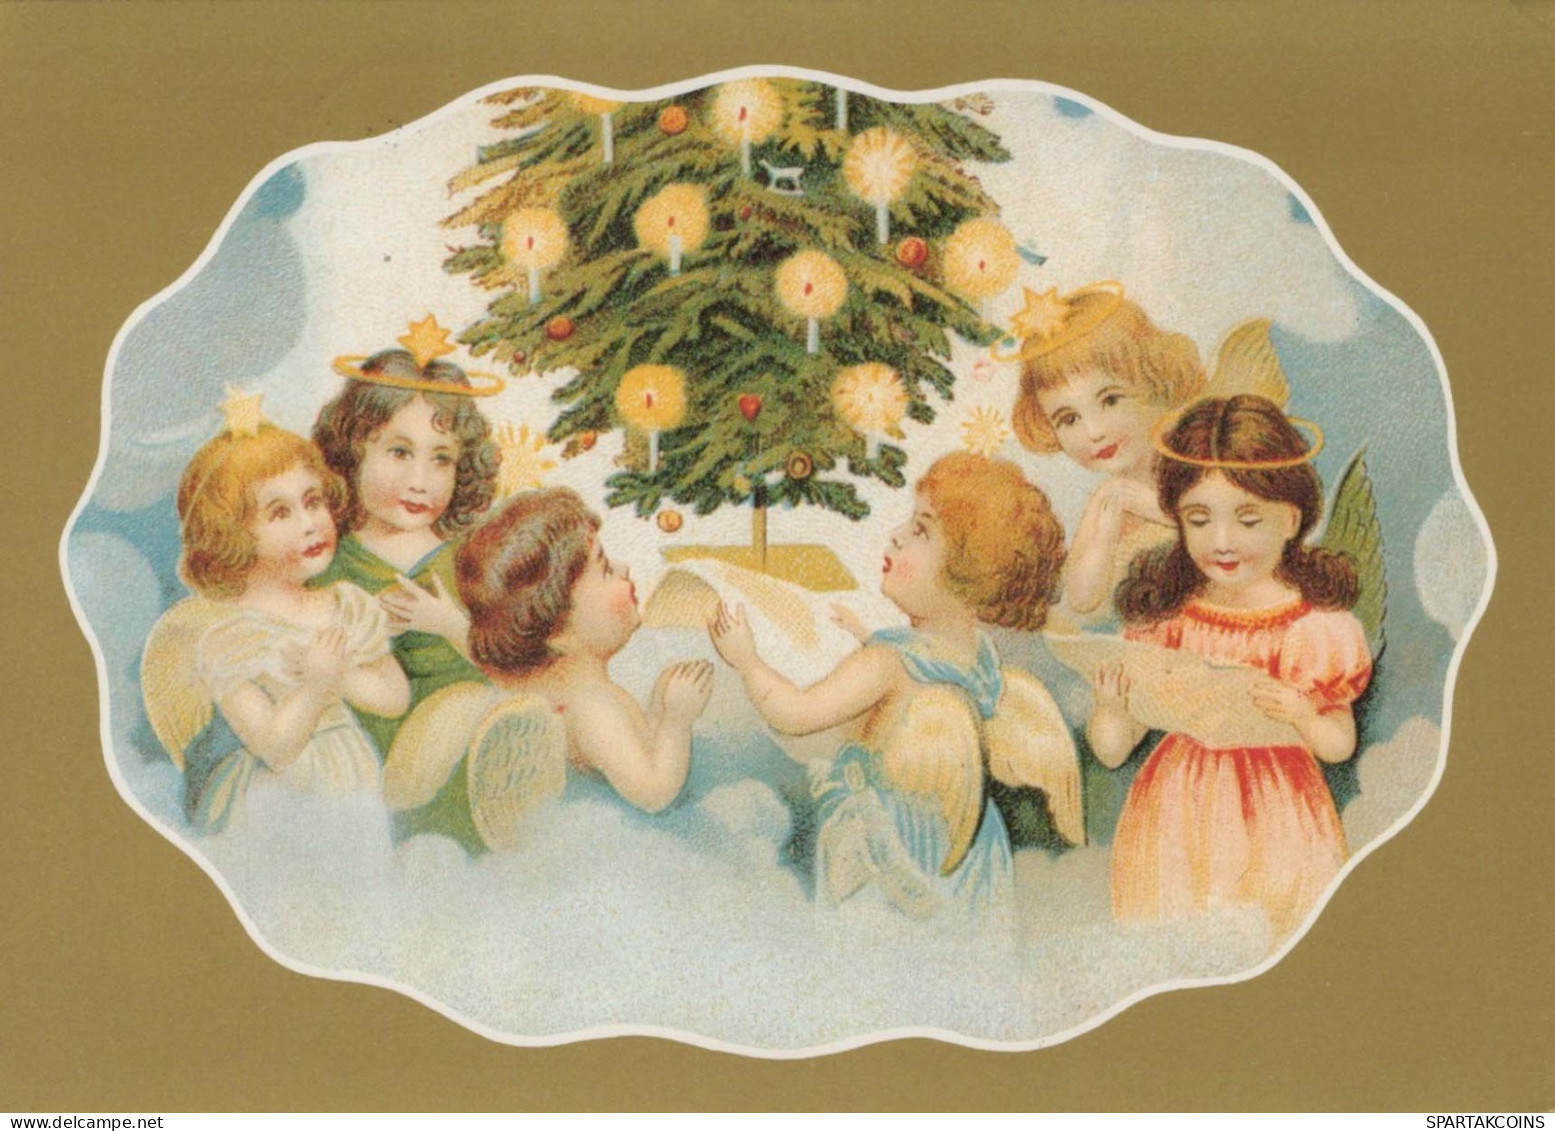 ANGELO Buon Anno Natale Vintage Cartolina CPSM #PAS767.IT - Anges